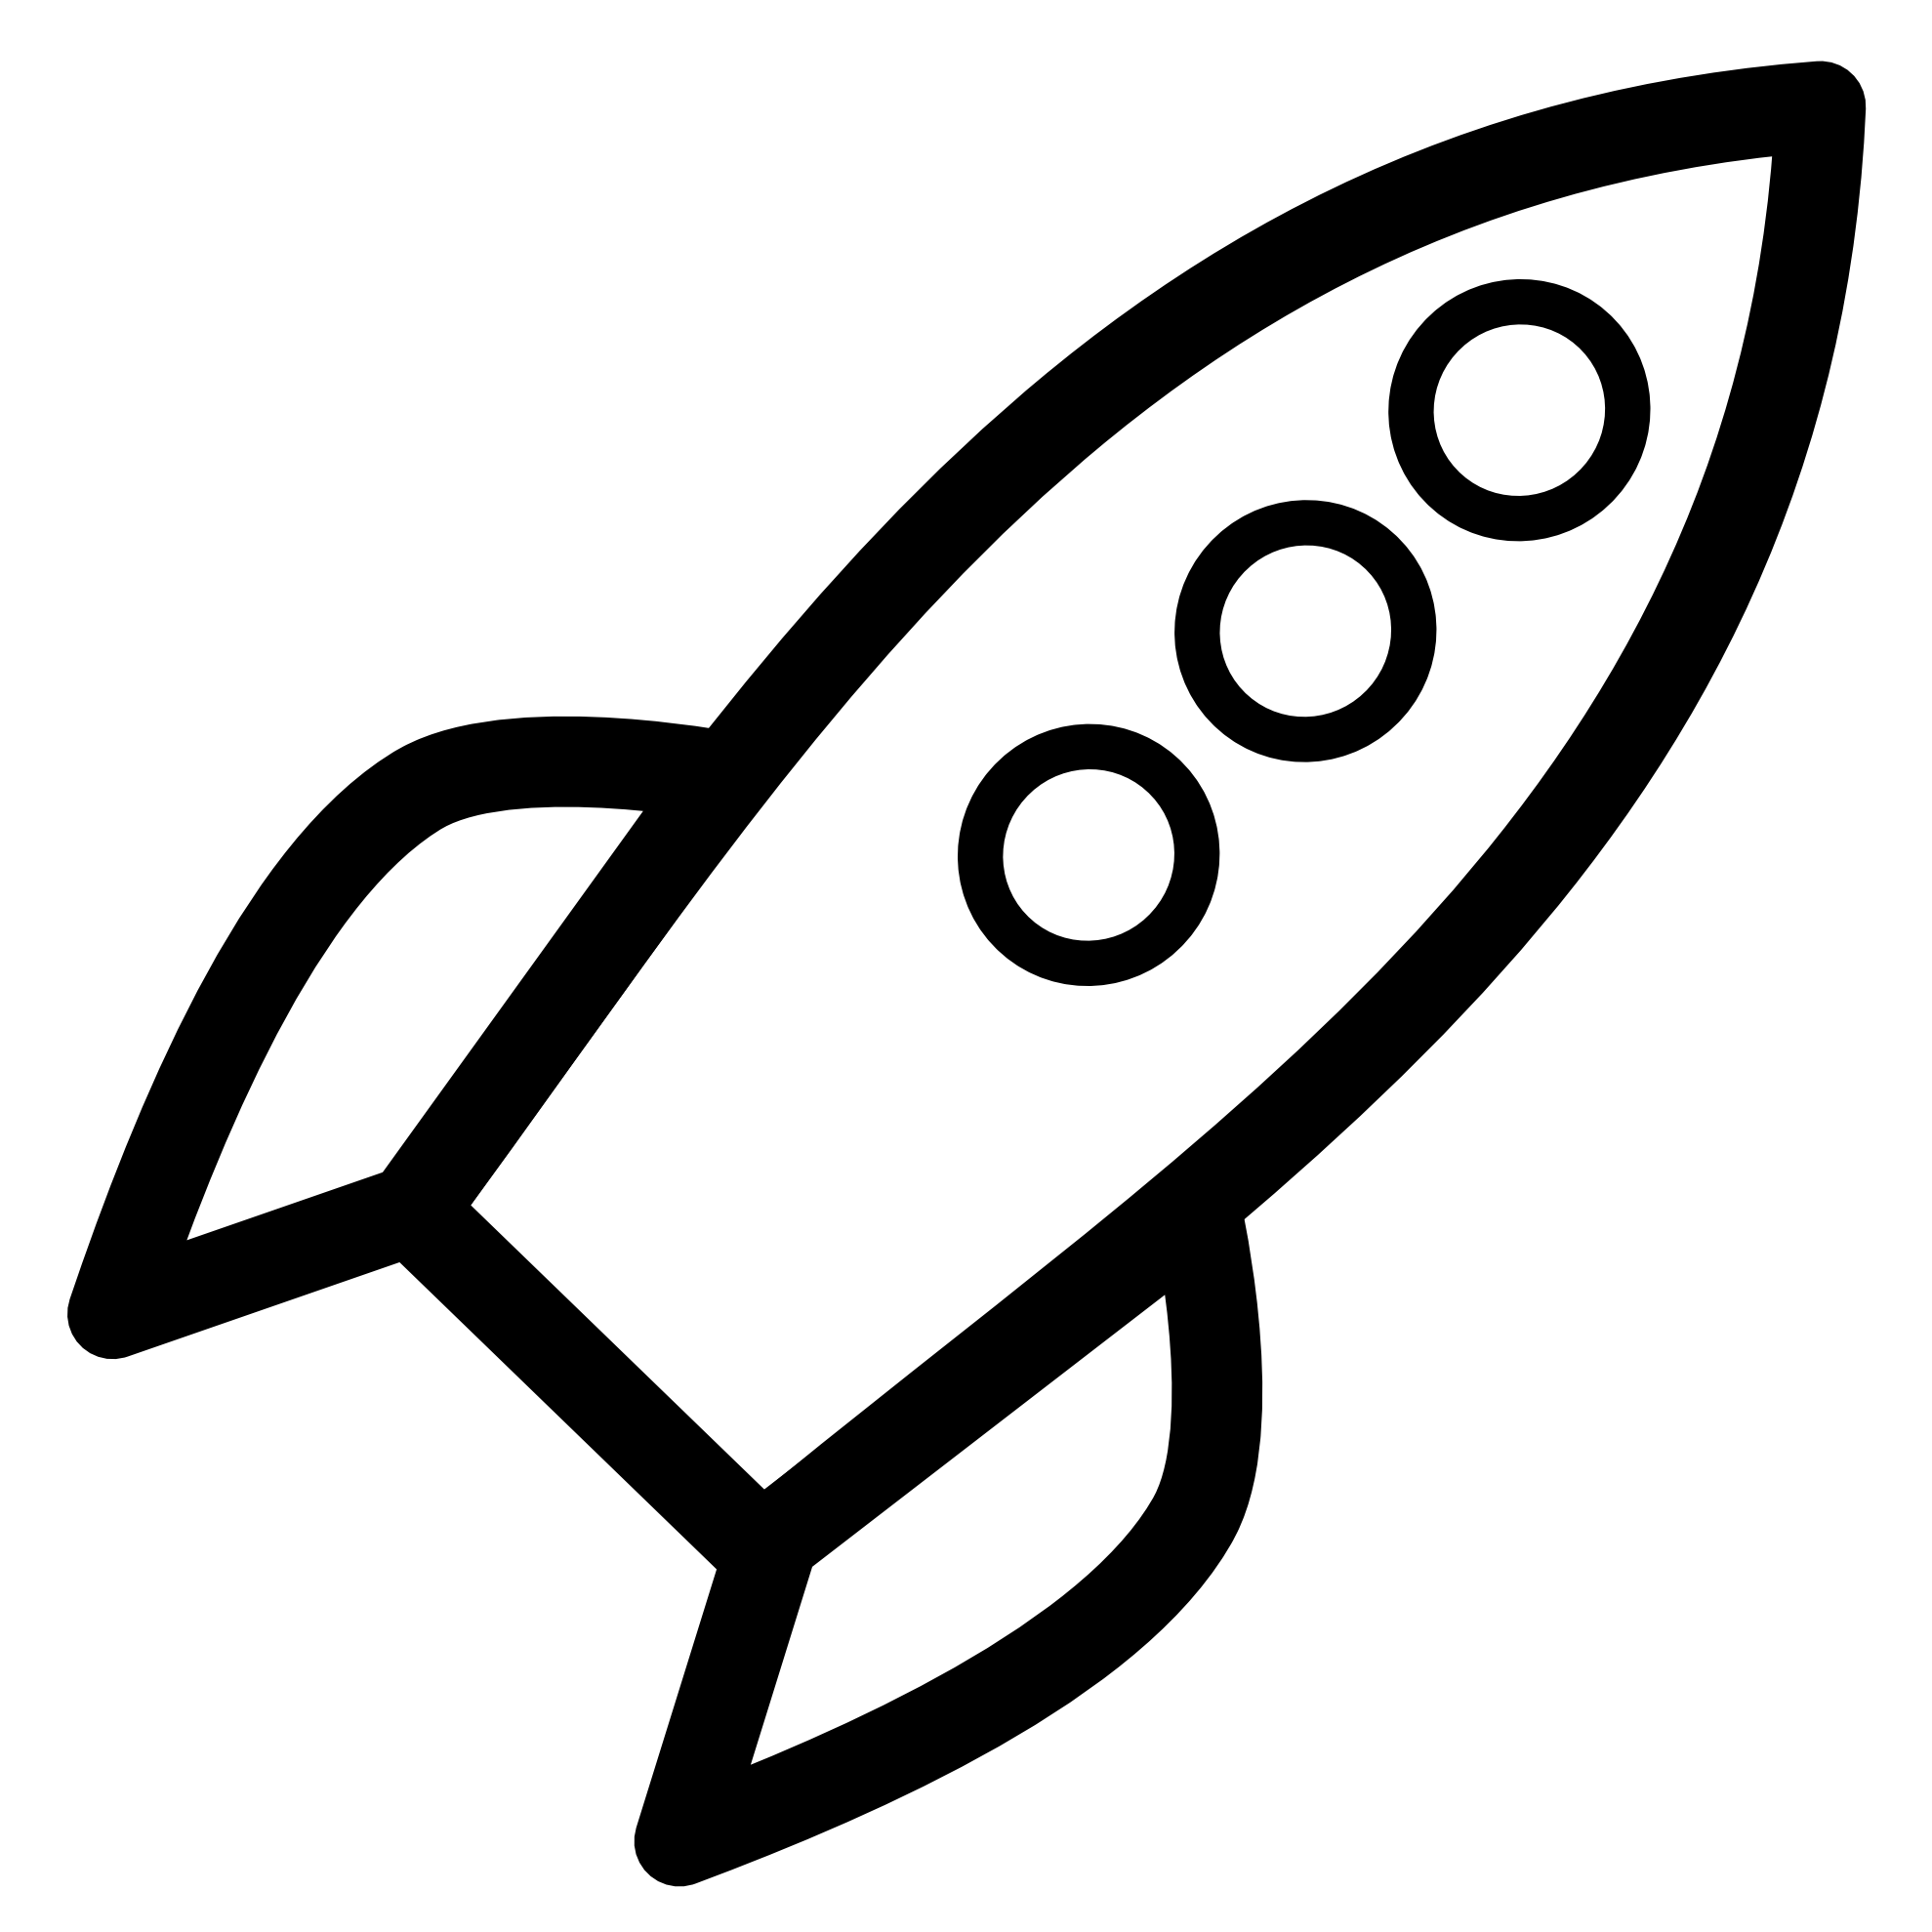 Rocket clipart black and white free image